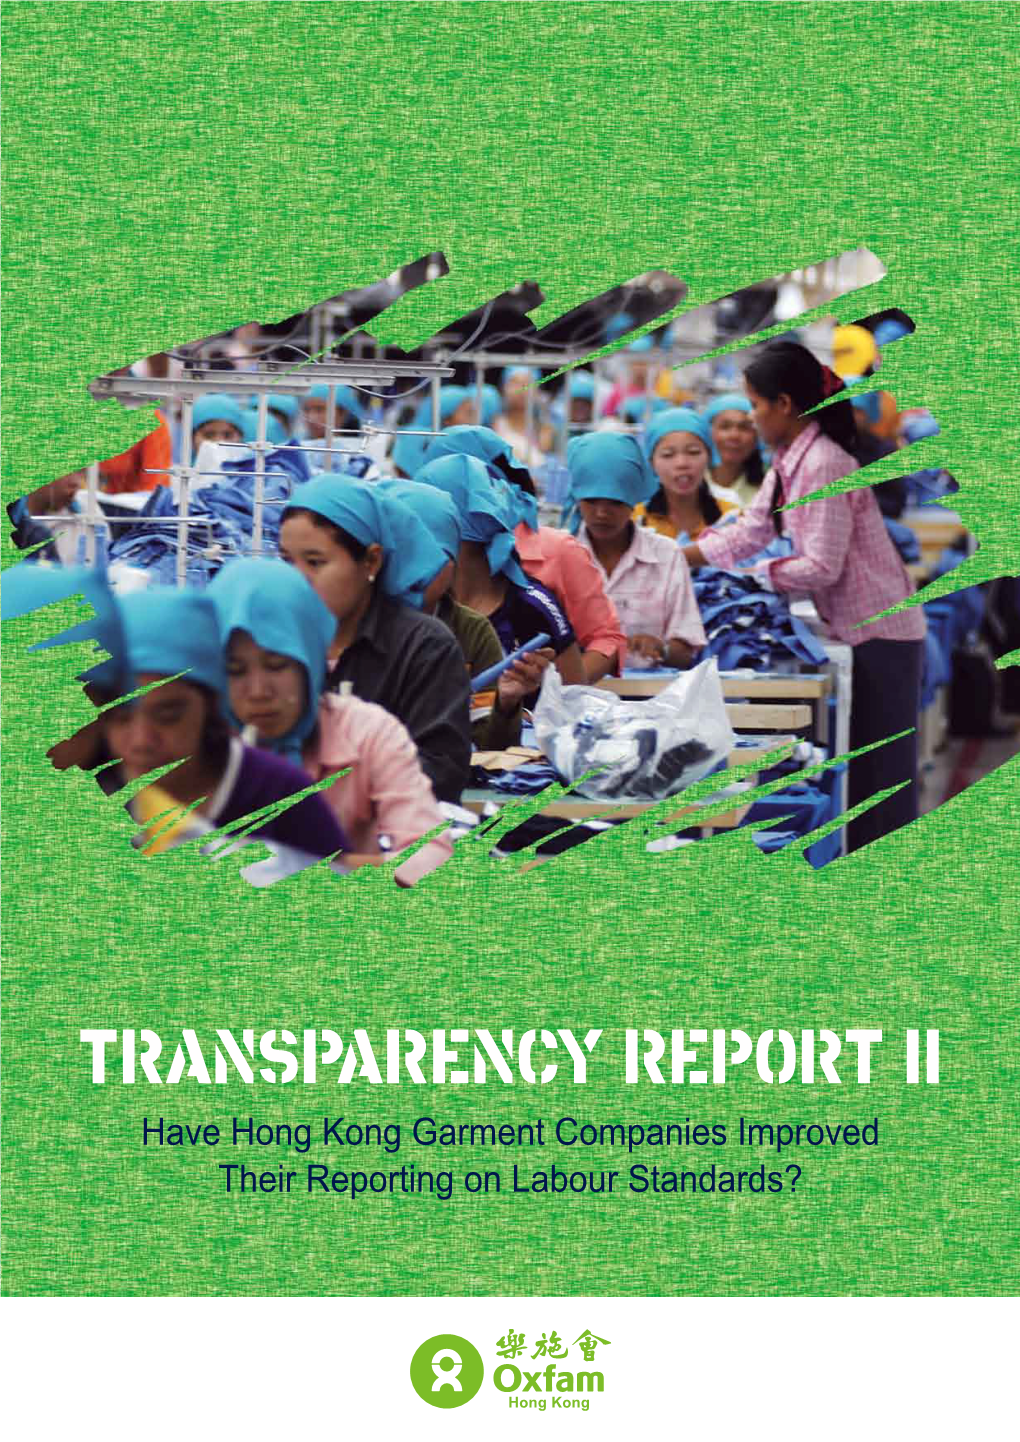 TRANSPARENCY REPORT II Have Hong Kong Garment Companies Improved Their Reporting on Labour Standards? © Oxfam Hong Kong March 2009